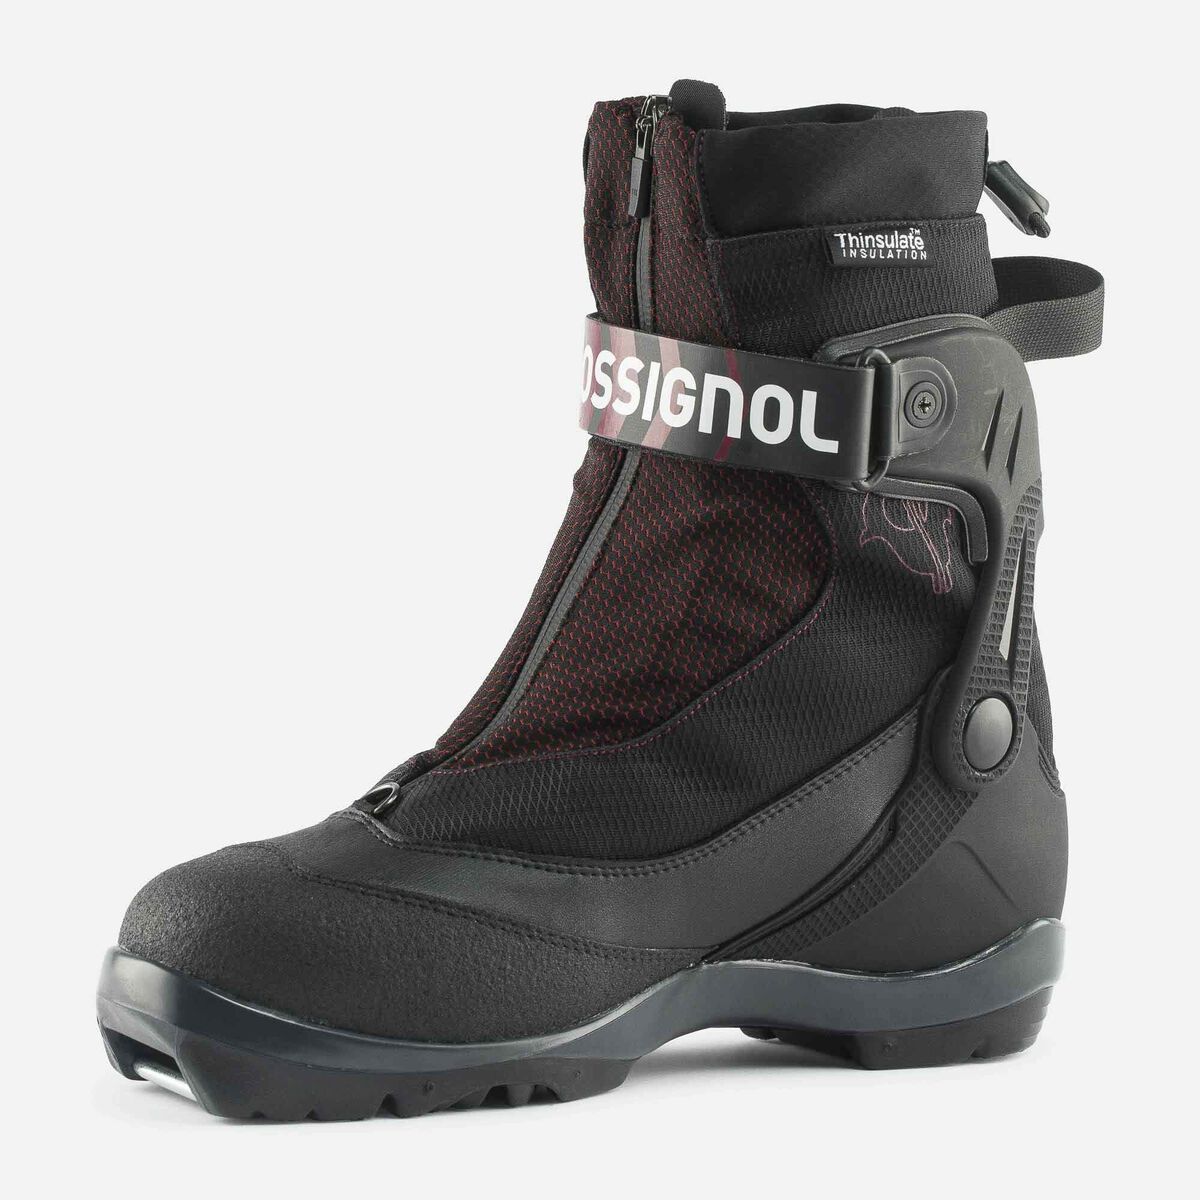 Unisex Backcountry Nordic Boots Bc X10